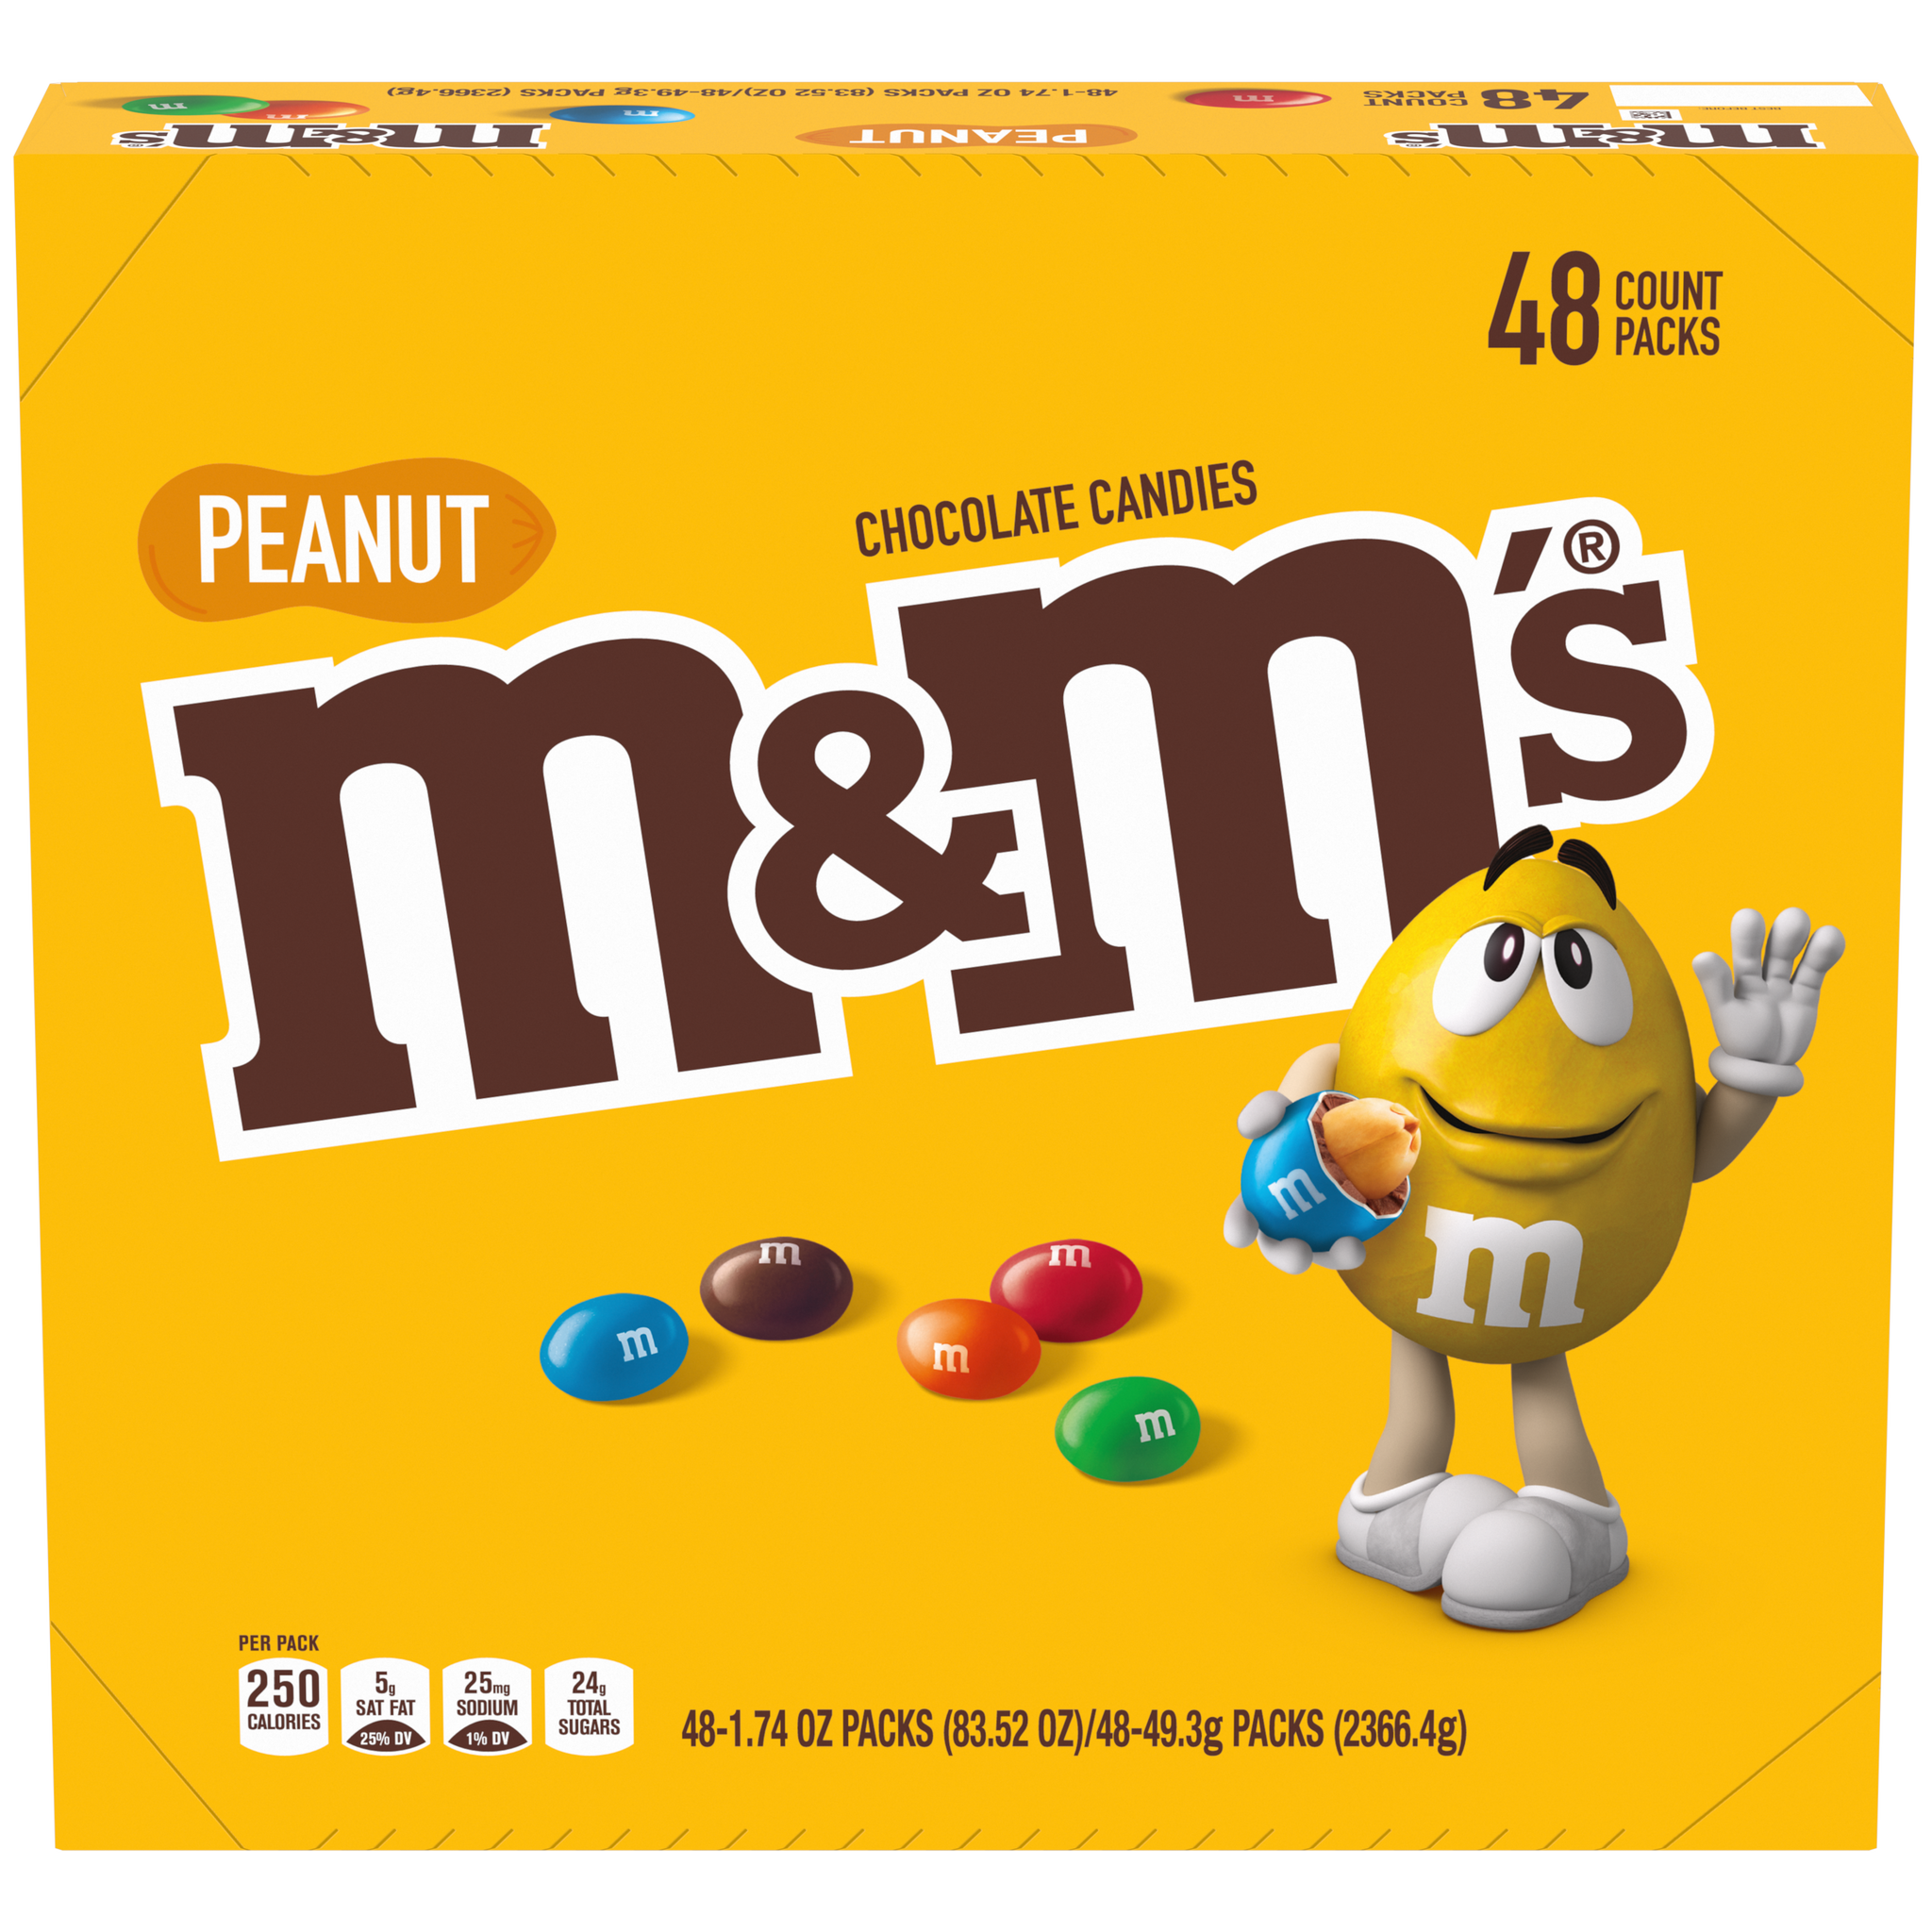 Why do M&Ms from the big bags taste so much better than the M&Ms